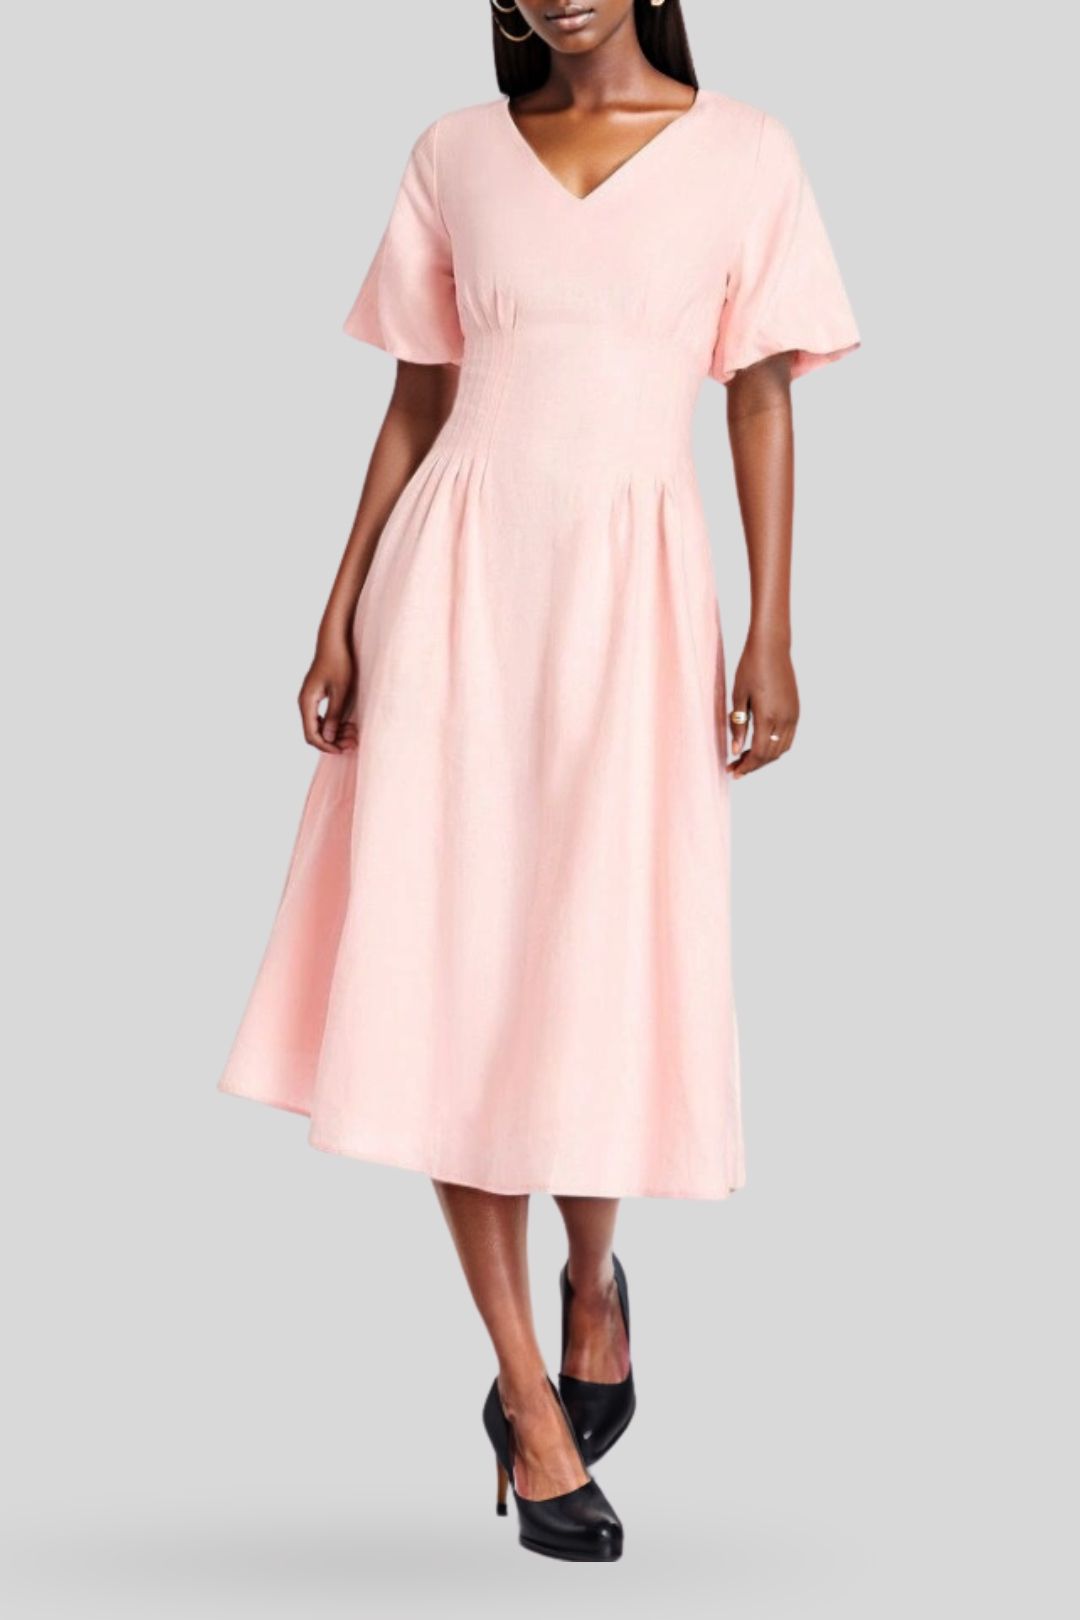 David Lawrence  Dione Linen Dress in Pink